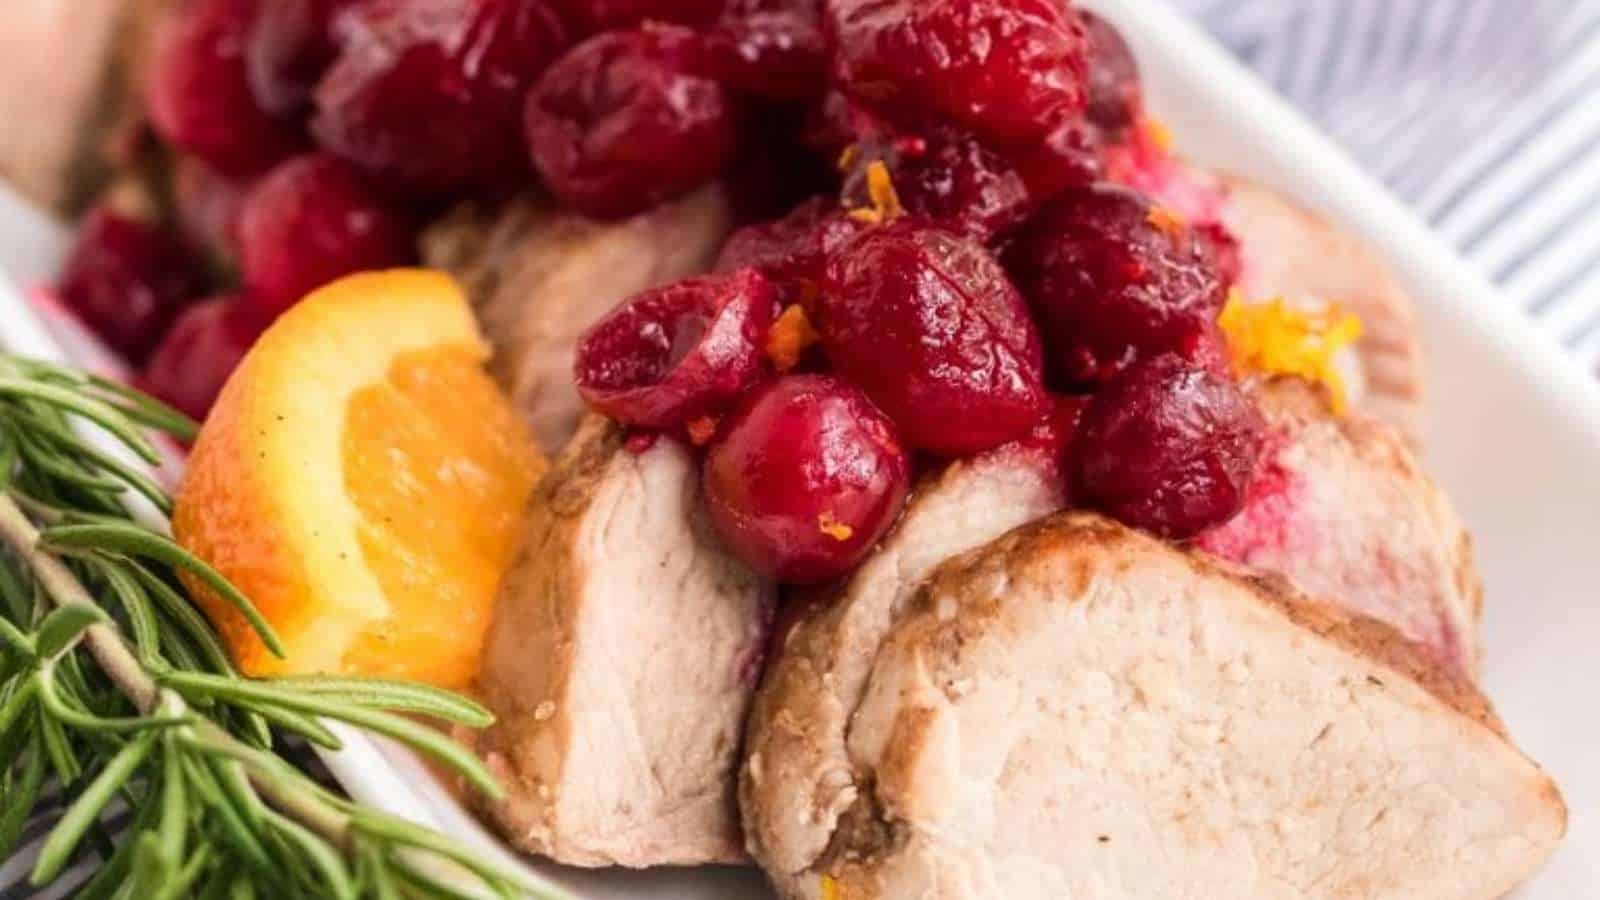 Pork tenderloin with cranberry sauce on a white plate.